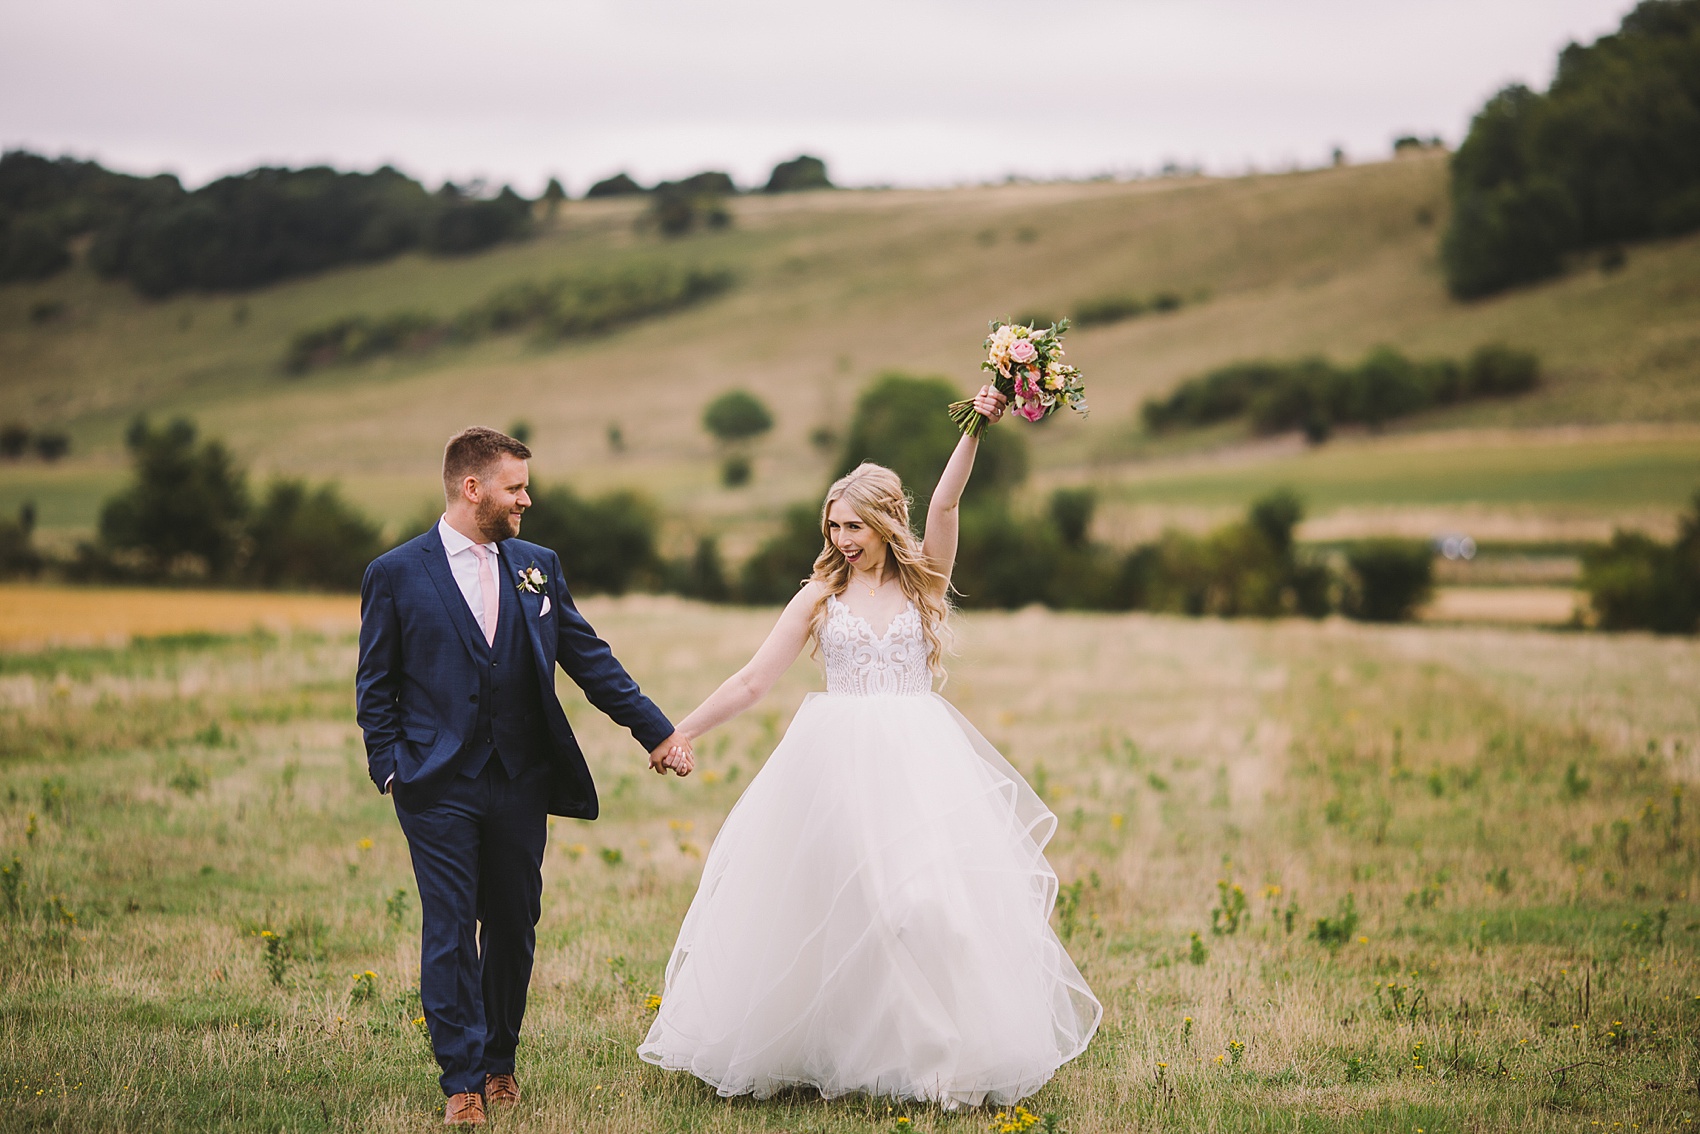 Hayley Paige tulle dress barn wedding  - A Blush Hayley Paige Dress for a Romantic + Whimsical English Country Garden Inspired Barn Wedding